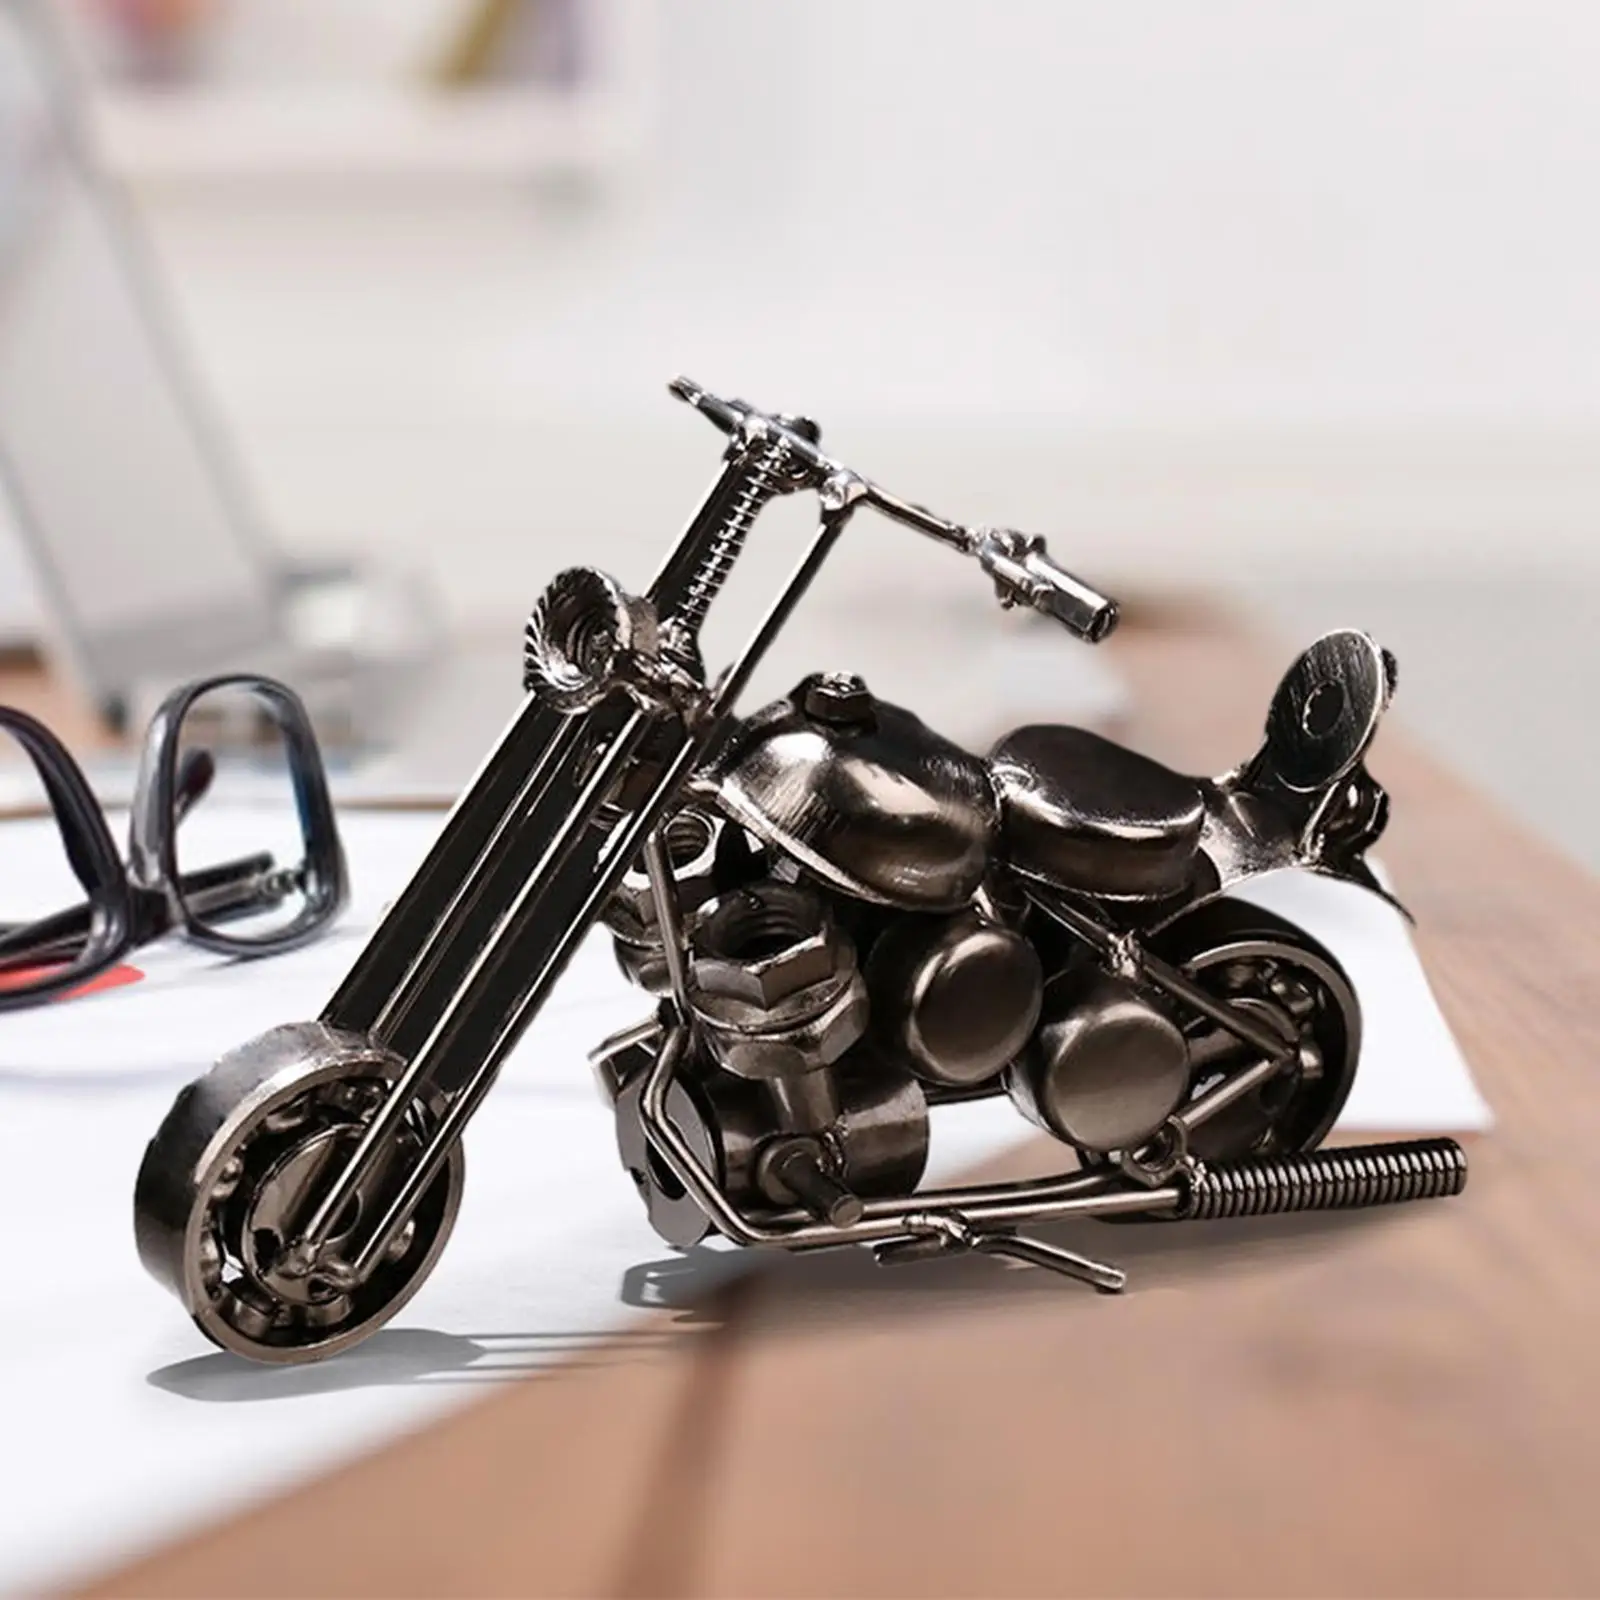 Motorcycle Model Motorcycle Sculpture Crafts Photo Props Iron Artwork Collectible for Desk Home Adults Motorcycle Lovers